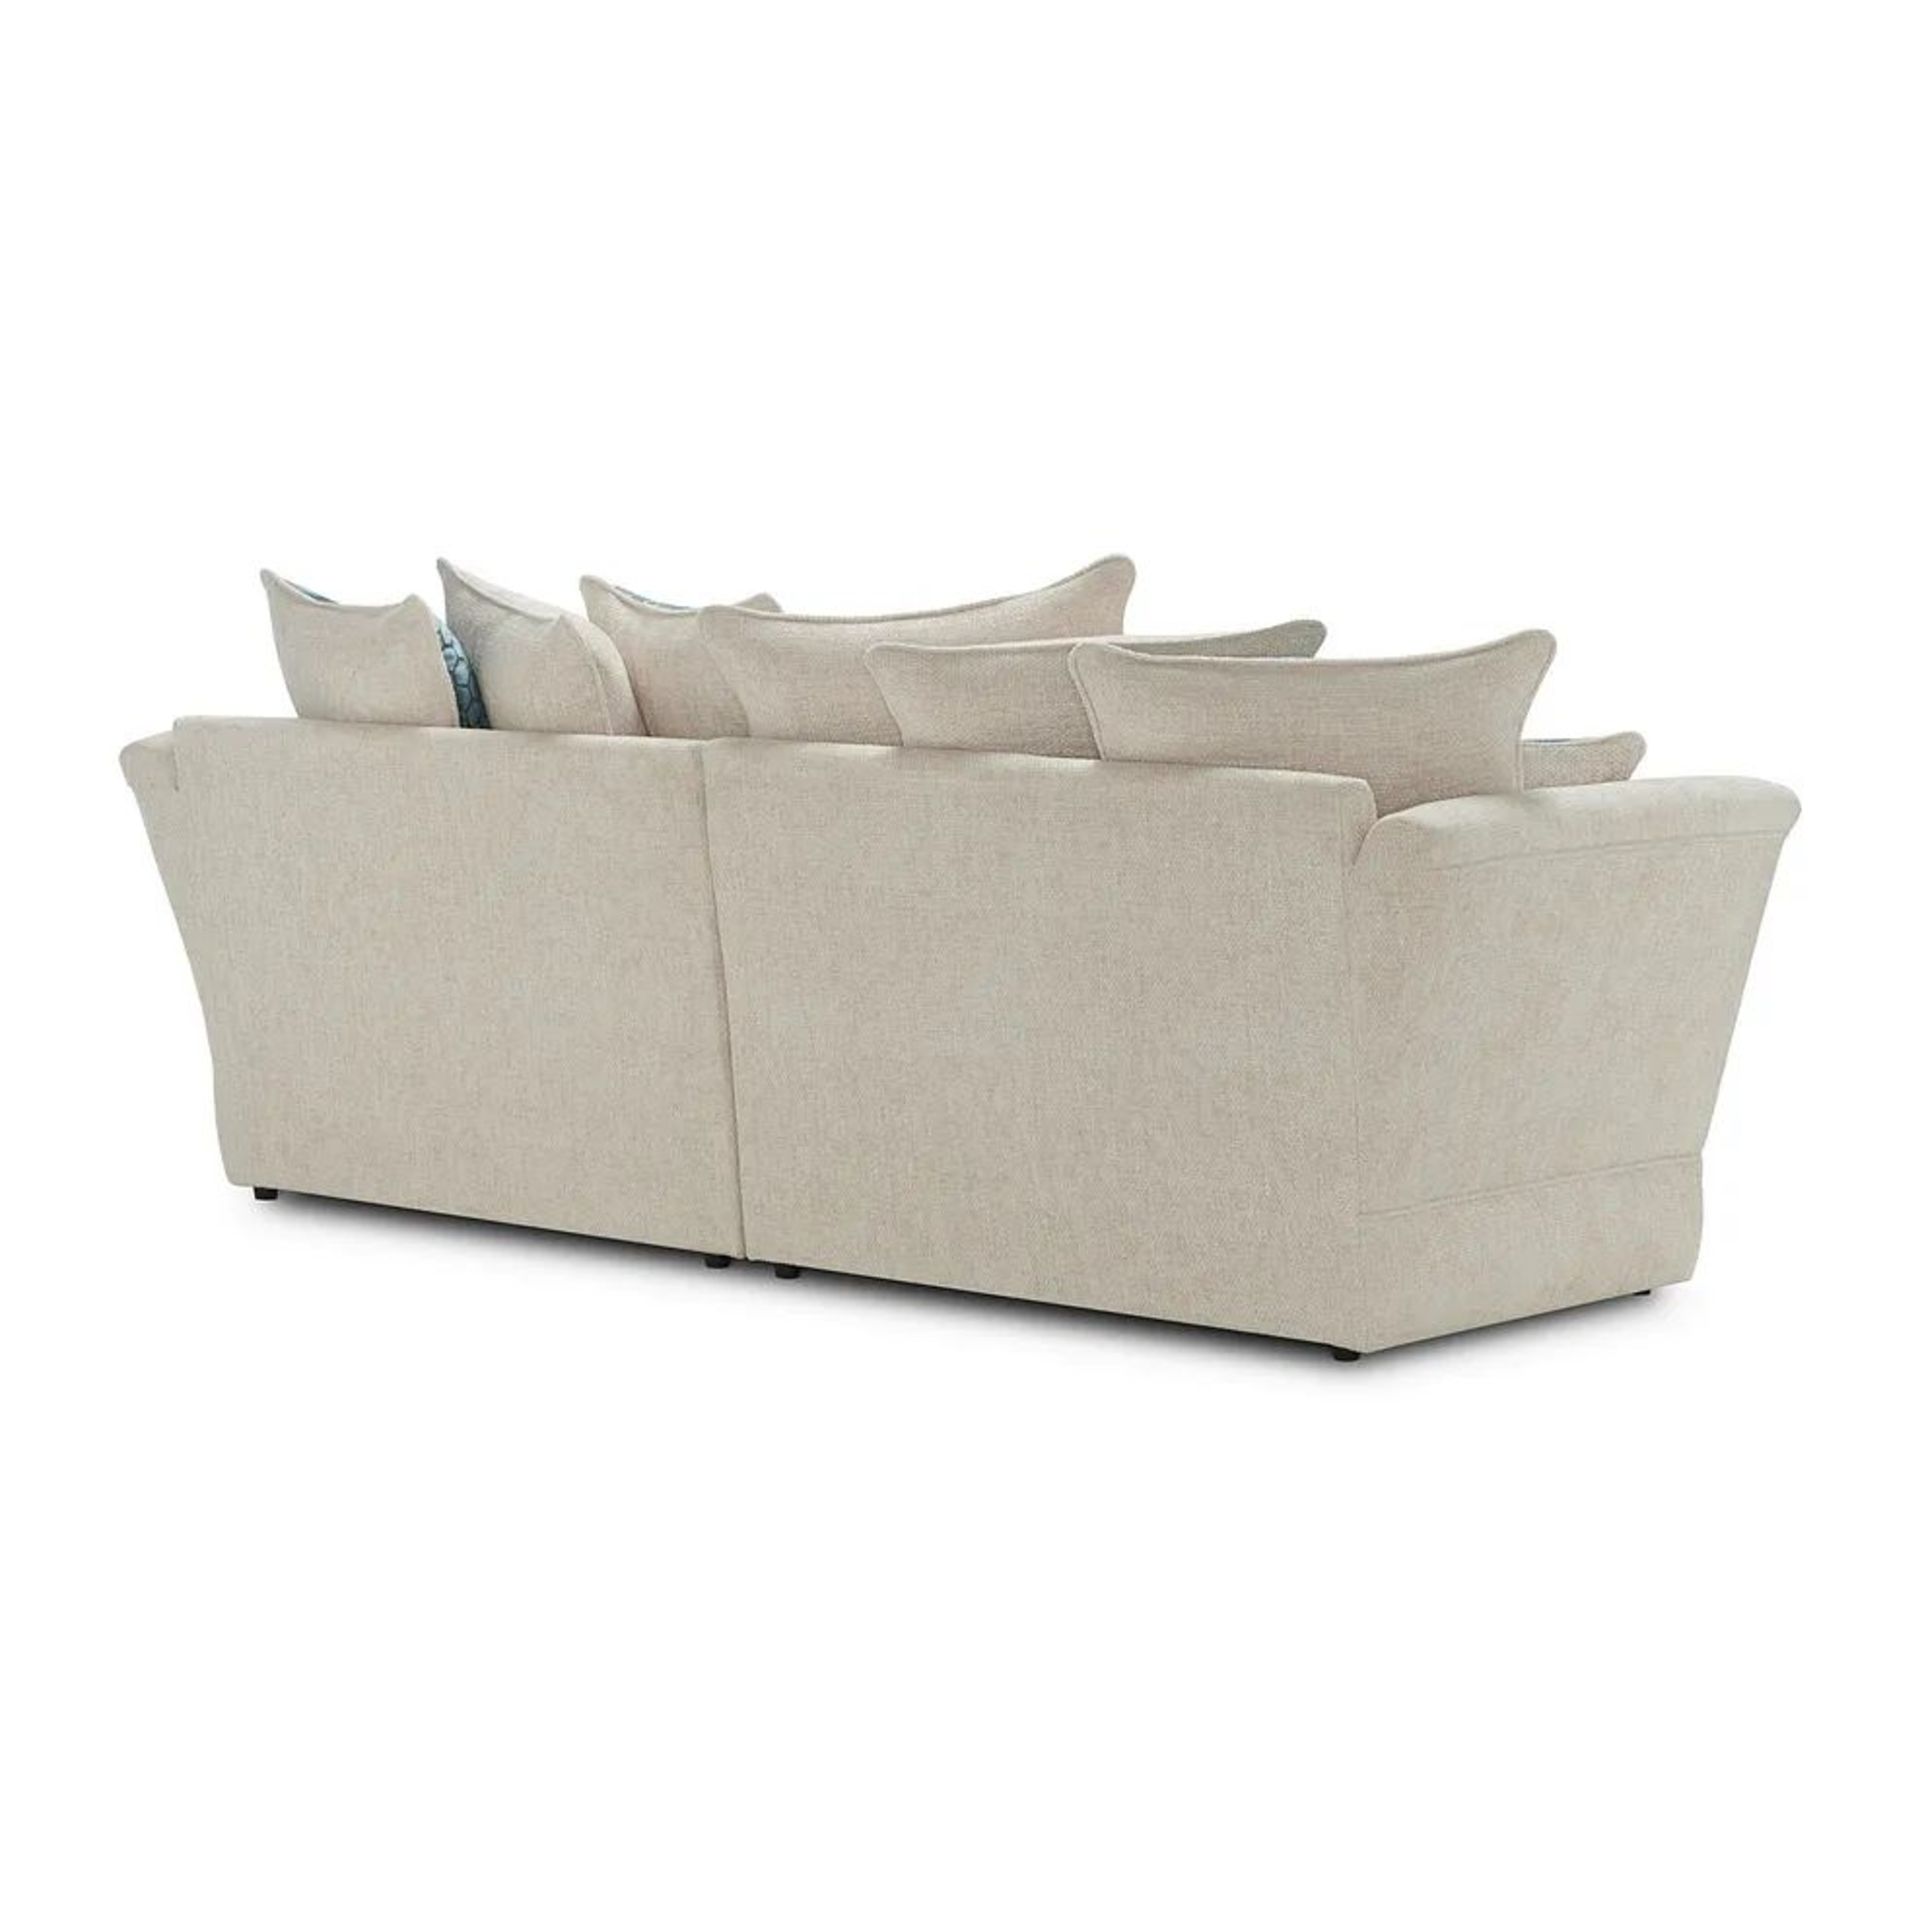 BRAND NEW CARRINGTON 4 Seater Pillow Back Split Sofa - NATURAL FABRIC. RRP £1149. Bring a modern - Image 3 of 8